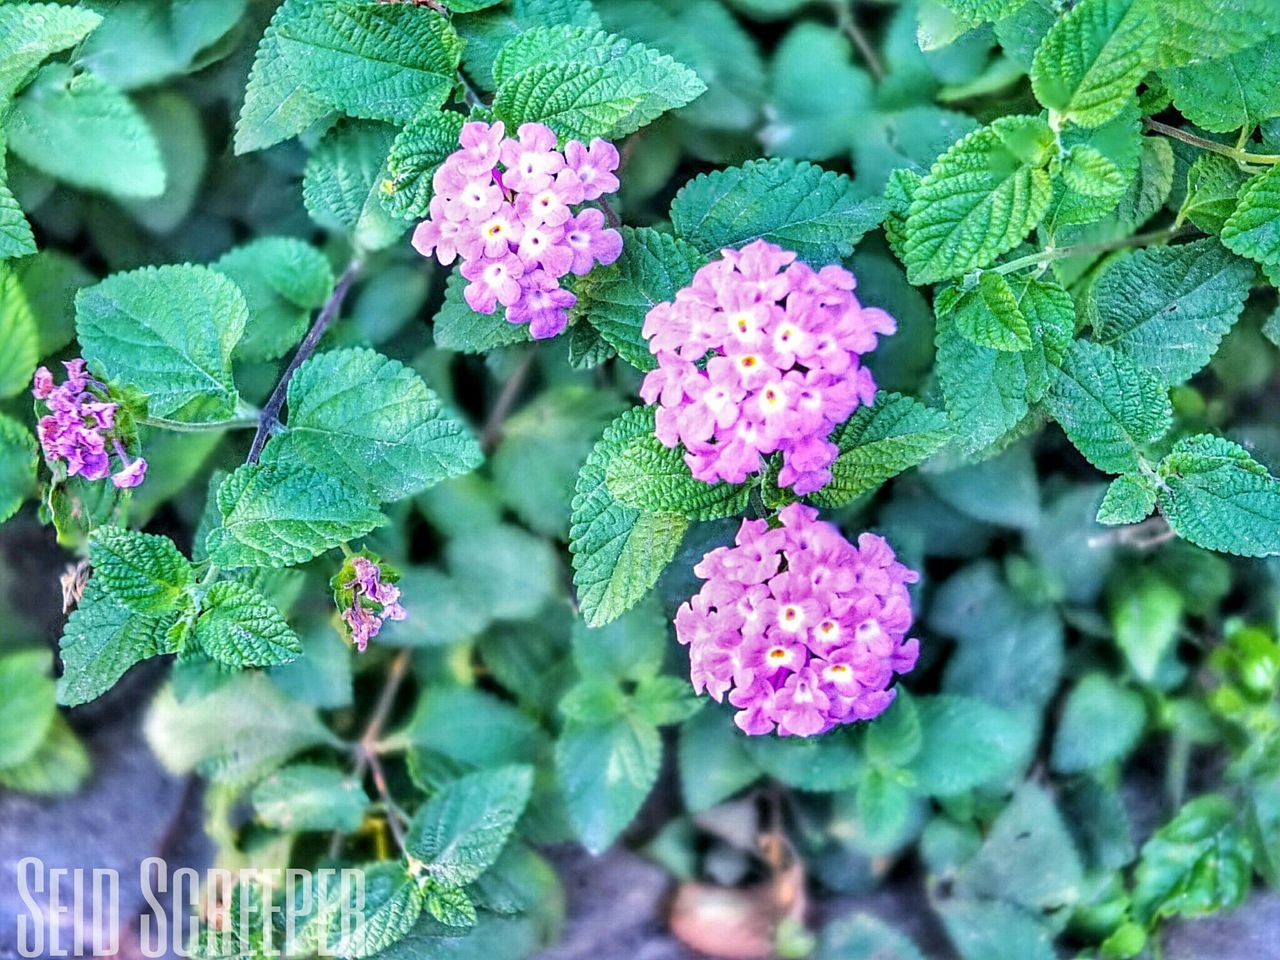 flower, leaf, freshness, growth, plant, fragility, beauty in nature, green color, nature, pink color, close-up, petal, high angle view, blooming, focus on foreground, flower head, day, outdoors, park - man made space, in bloom